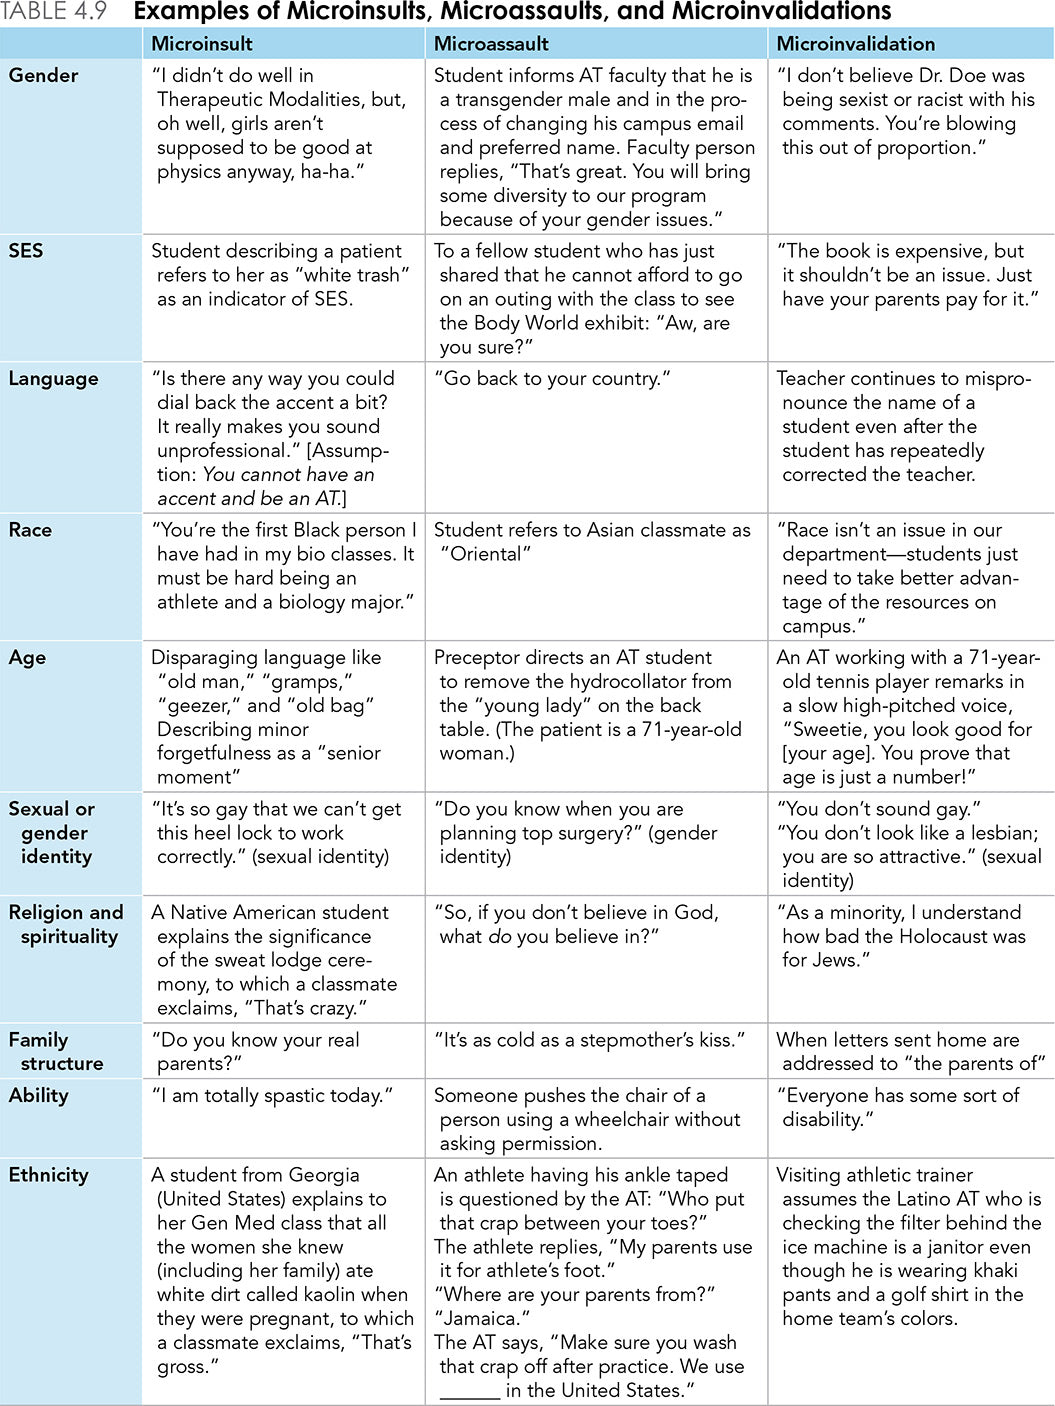 Table 4.9 Examples of Microinsults, Microassaults, and Microinvalidations